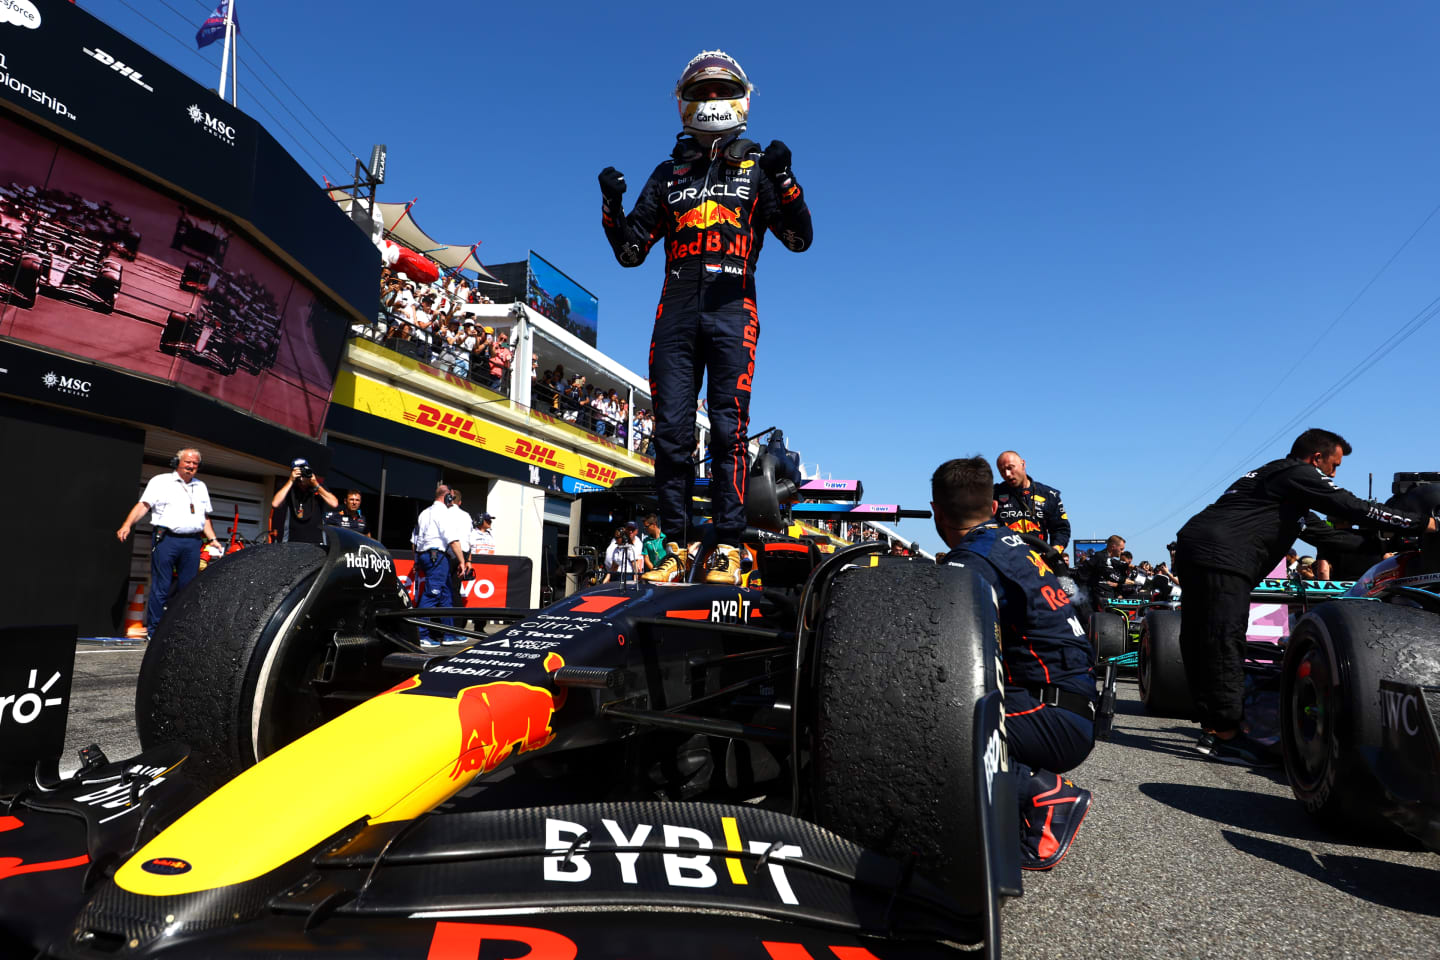 LE CASTELLET, FRANCE - JULY 24: Race winner Max Verstappen of the Netherlands and Oracle Red Bull Racing celebrates in parc ferme during the F1 Grand Prix of France at Circuit Paul Ricard on July 24, 2022 in Le Castellet, France. (Photo by Mark Thompson/Getty Images)